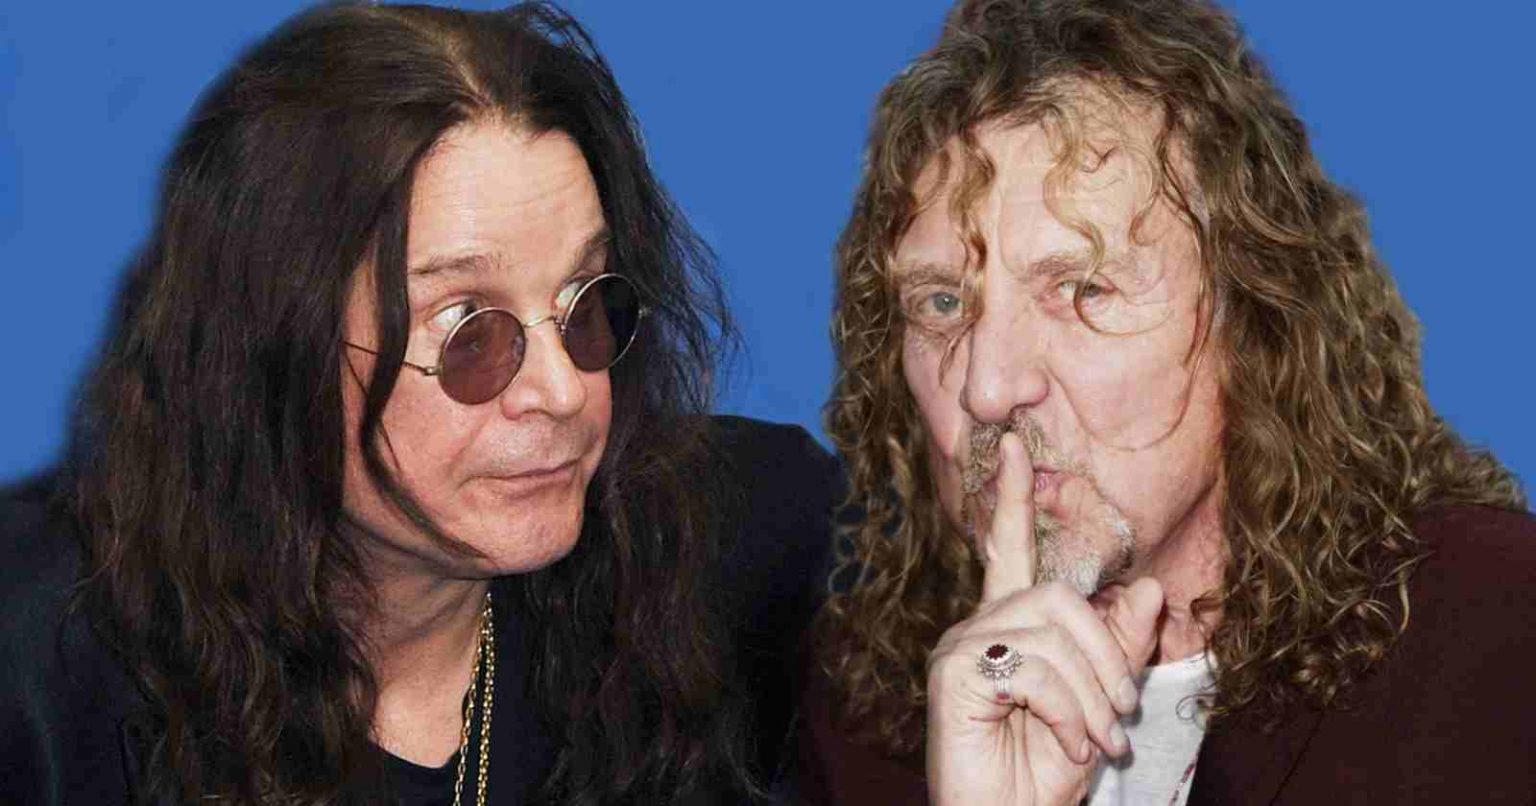 Ozzy Osbourne and his 10 favorite Heavy Metal albums of all time